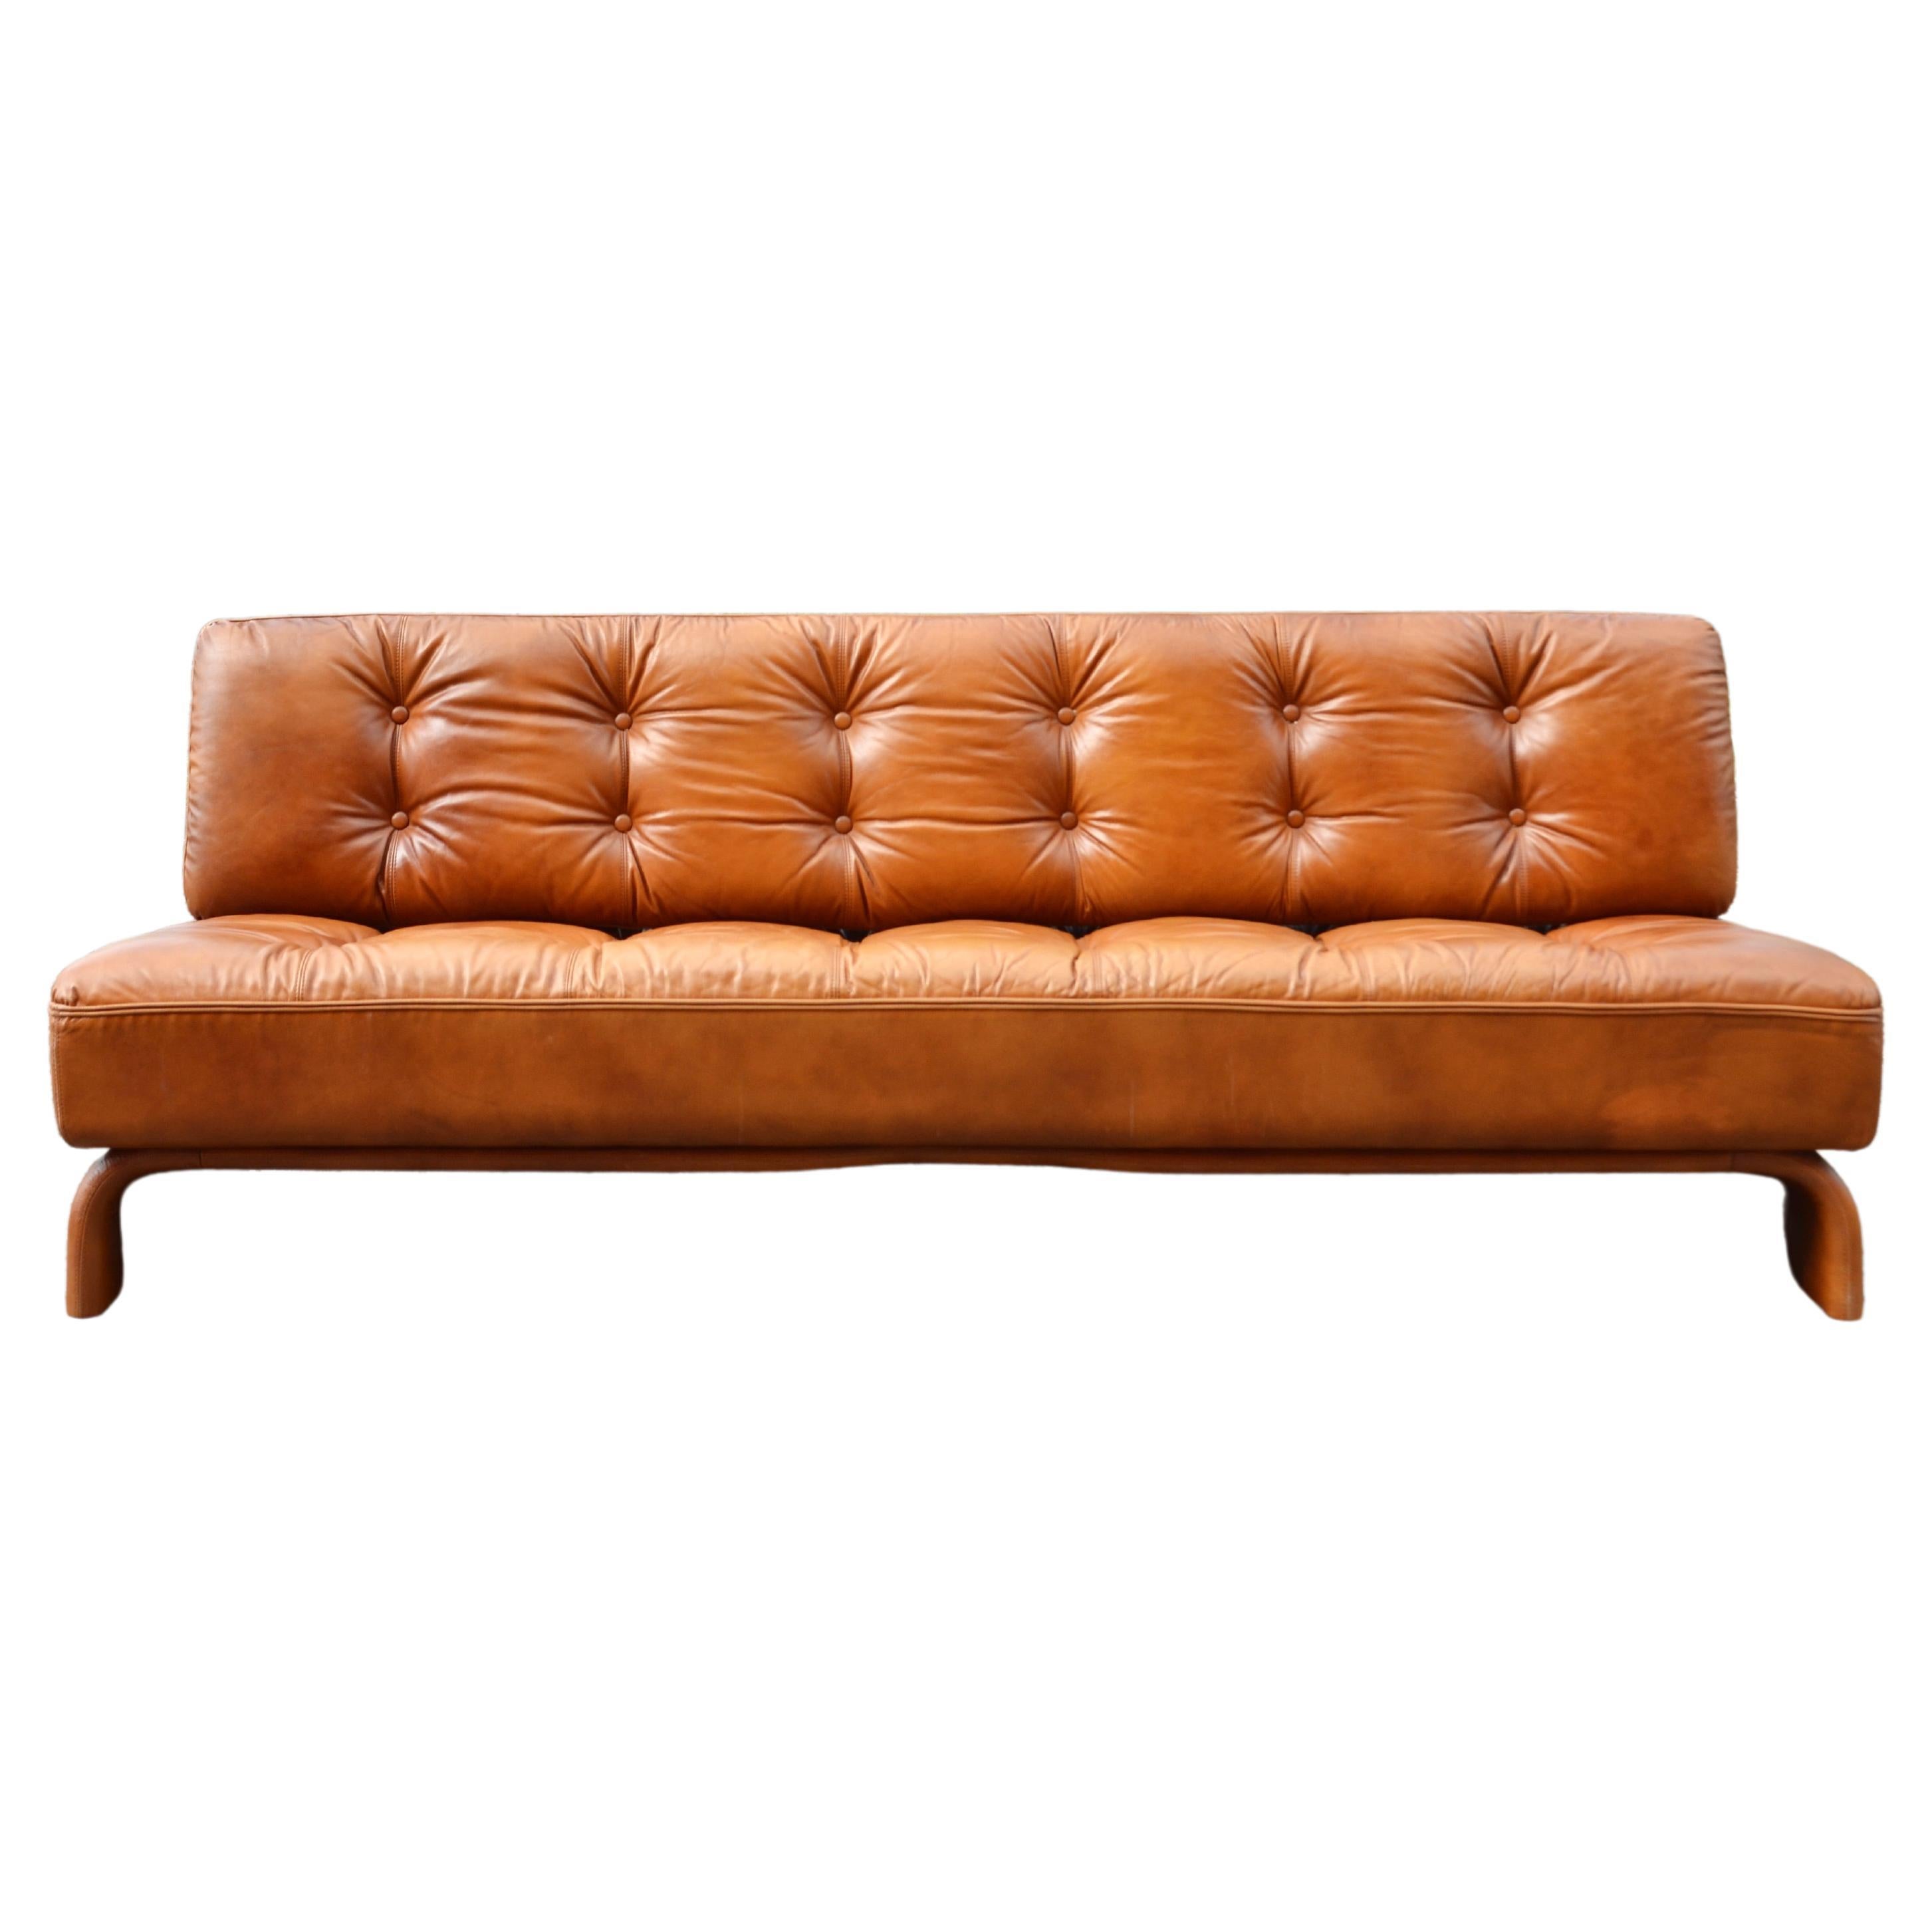 Johannes Spalt Cognac Daybed Leather Sofa Constanze by Wittmann